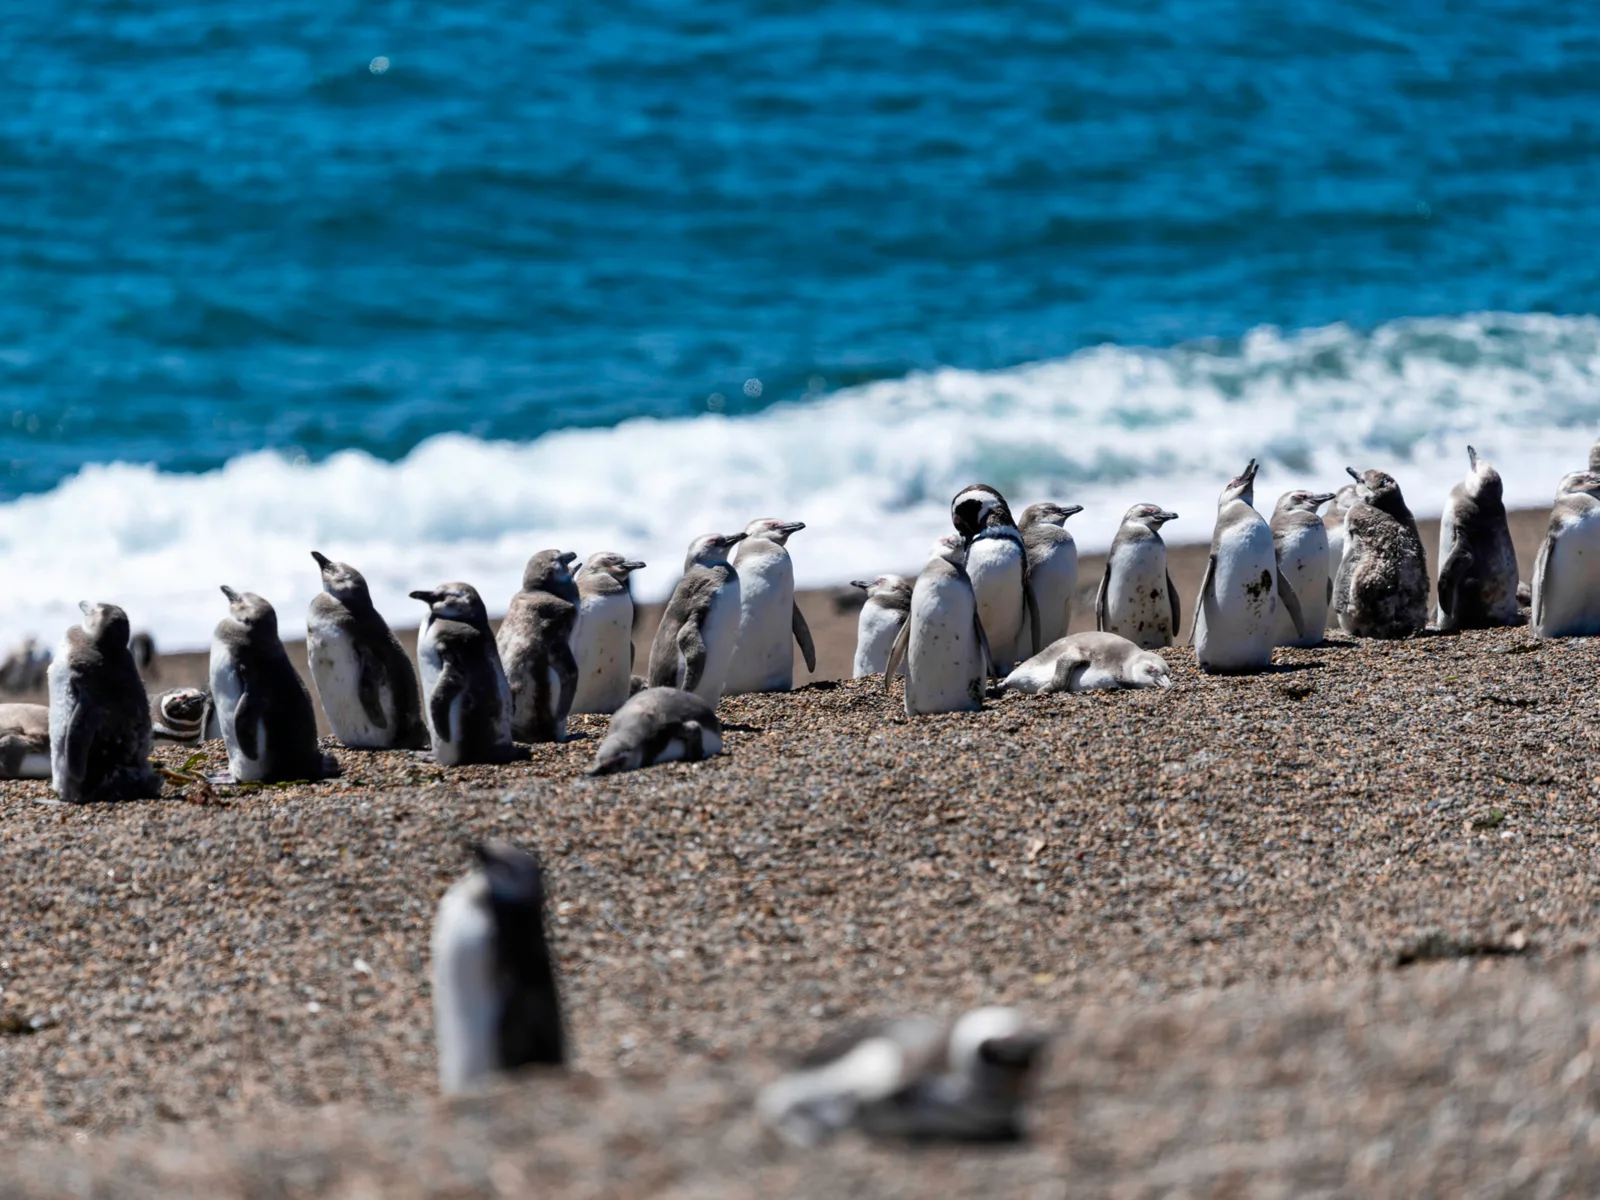 Penguins standing in the cold during the cheapest time to visit the Galapagos Islands